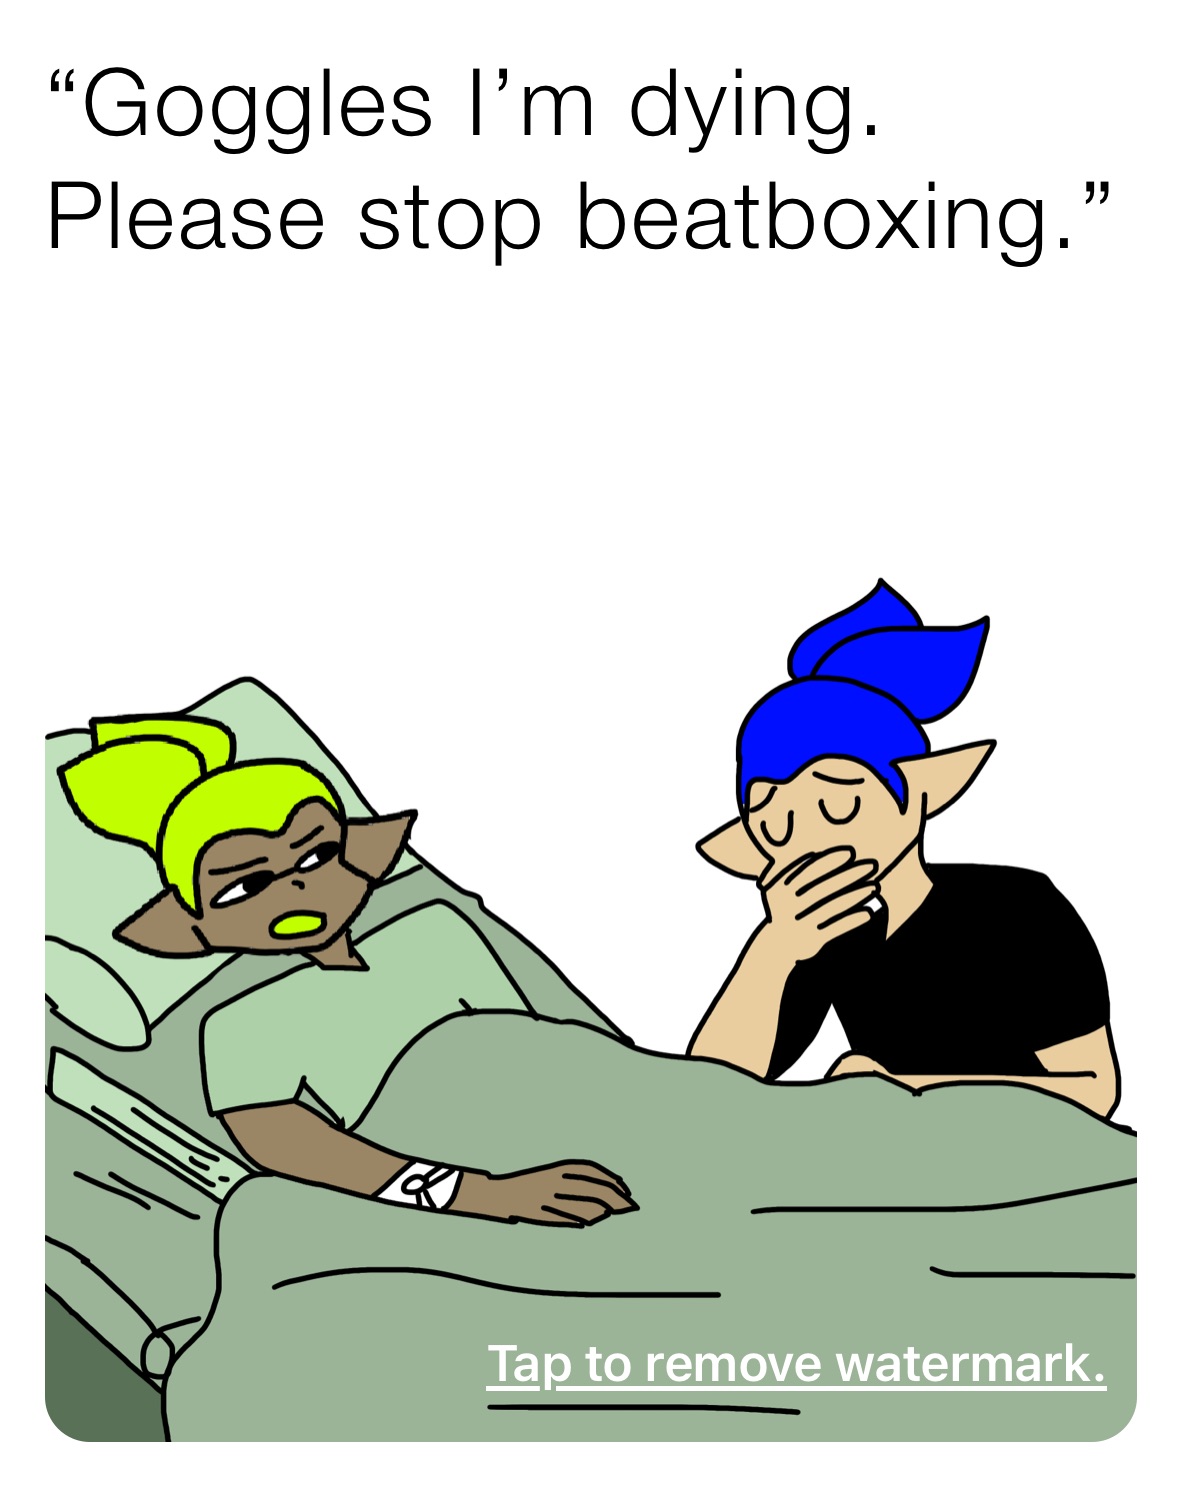 “Goggles I’m dying. Please stop beatboxing.”